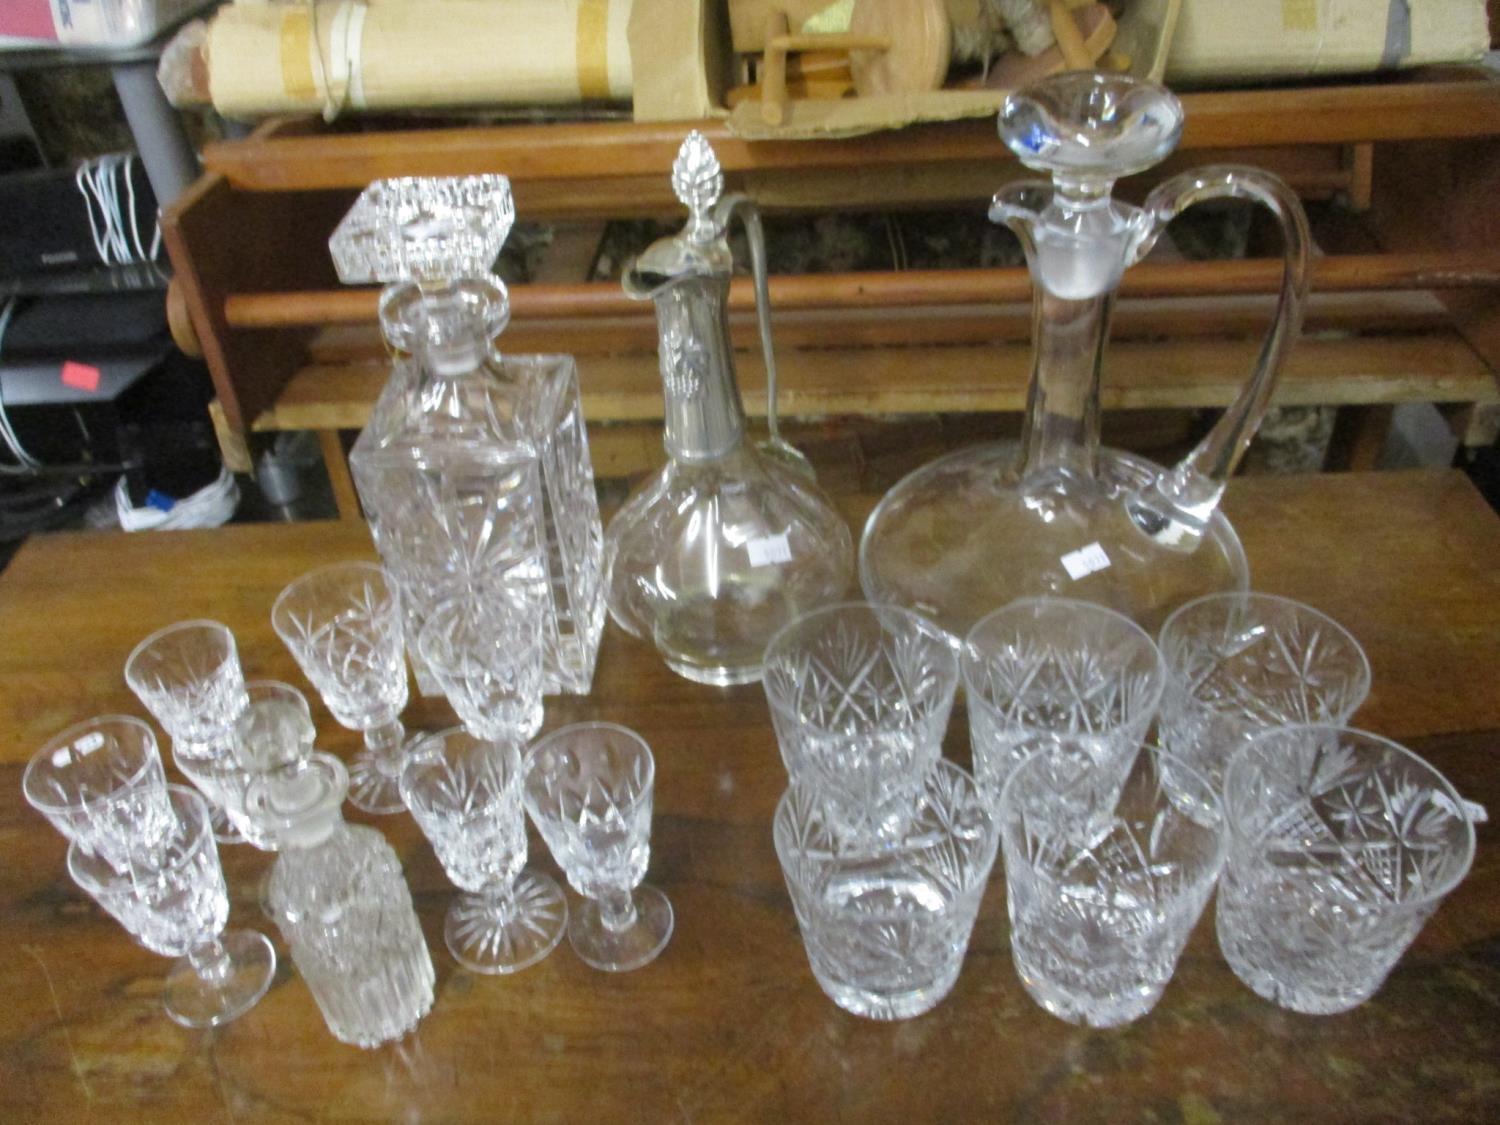 Glassware to include decanters, a claret jug and glasses